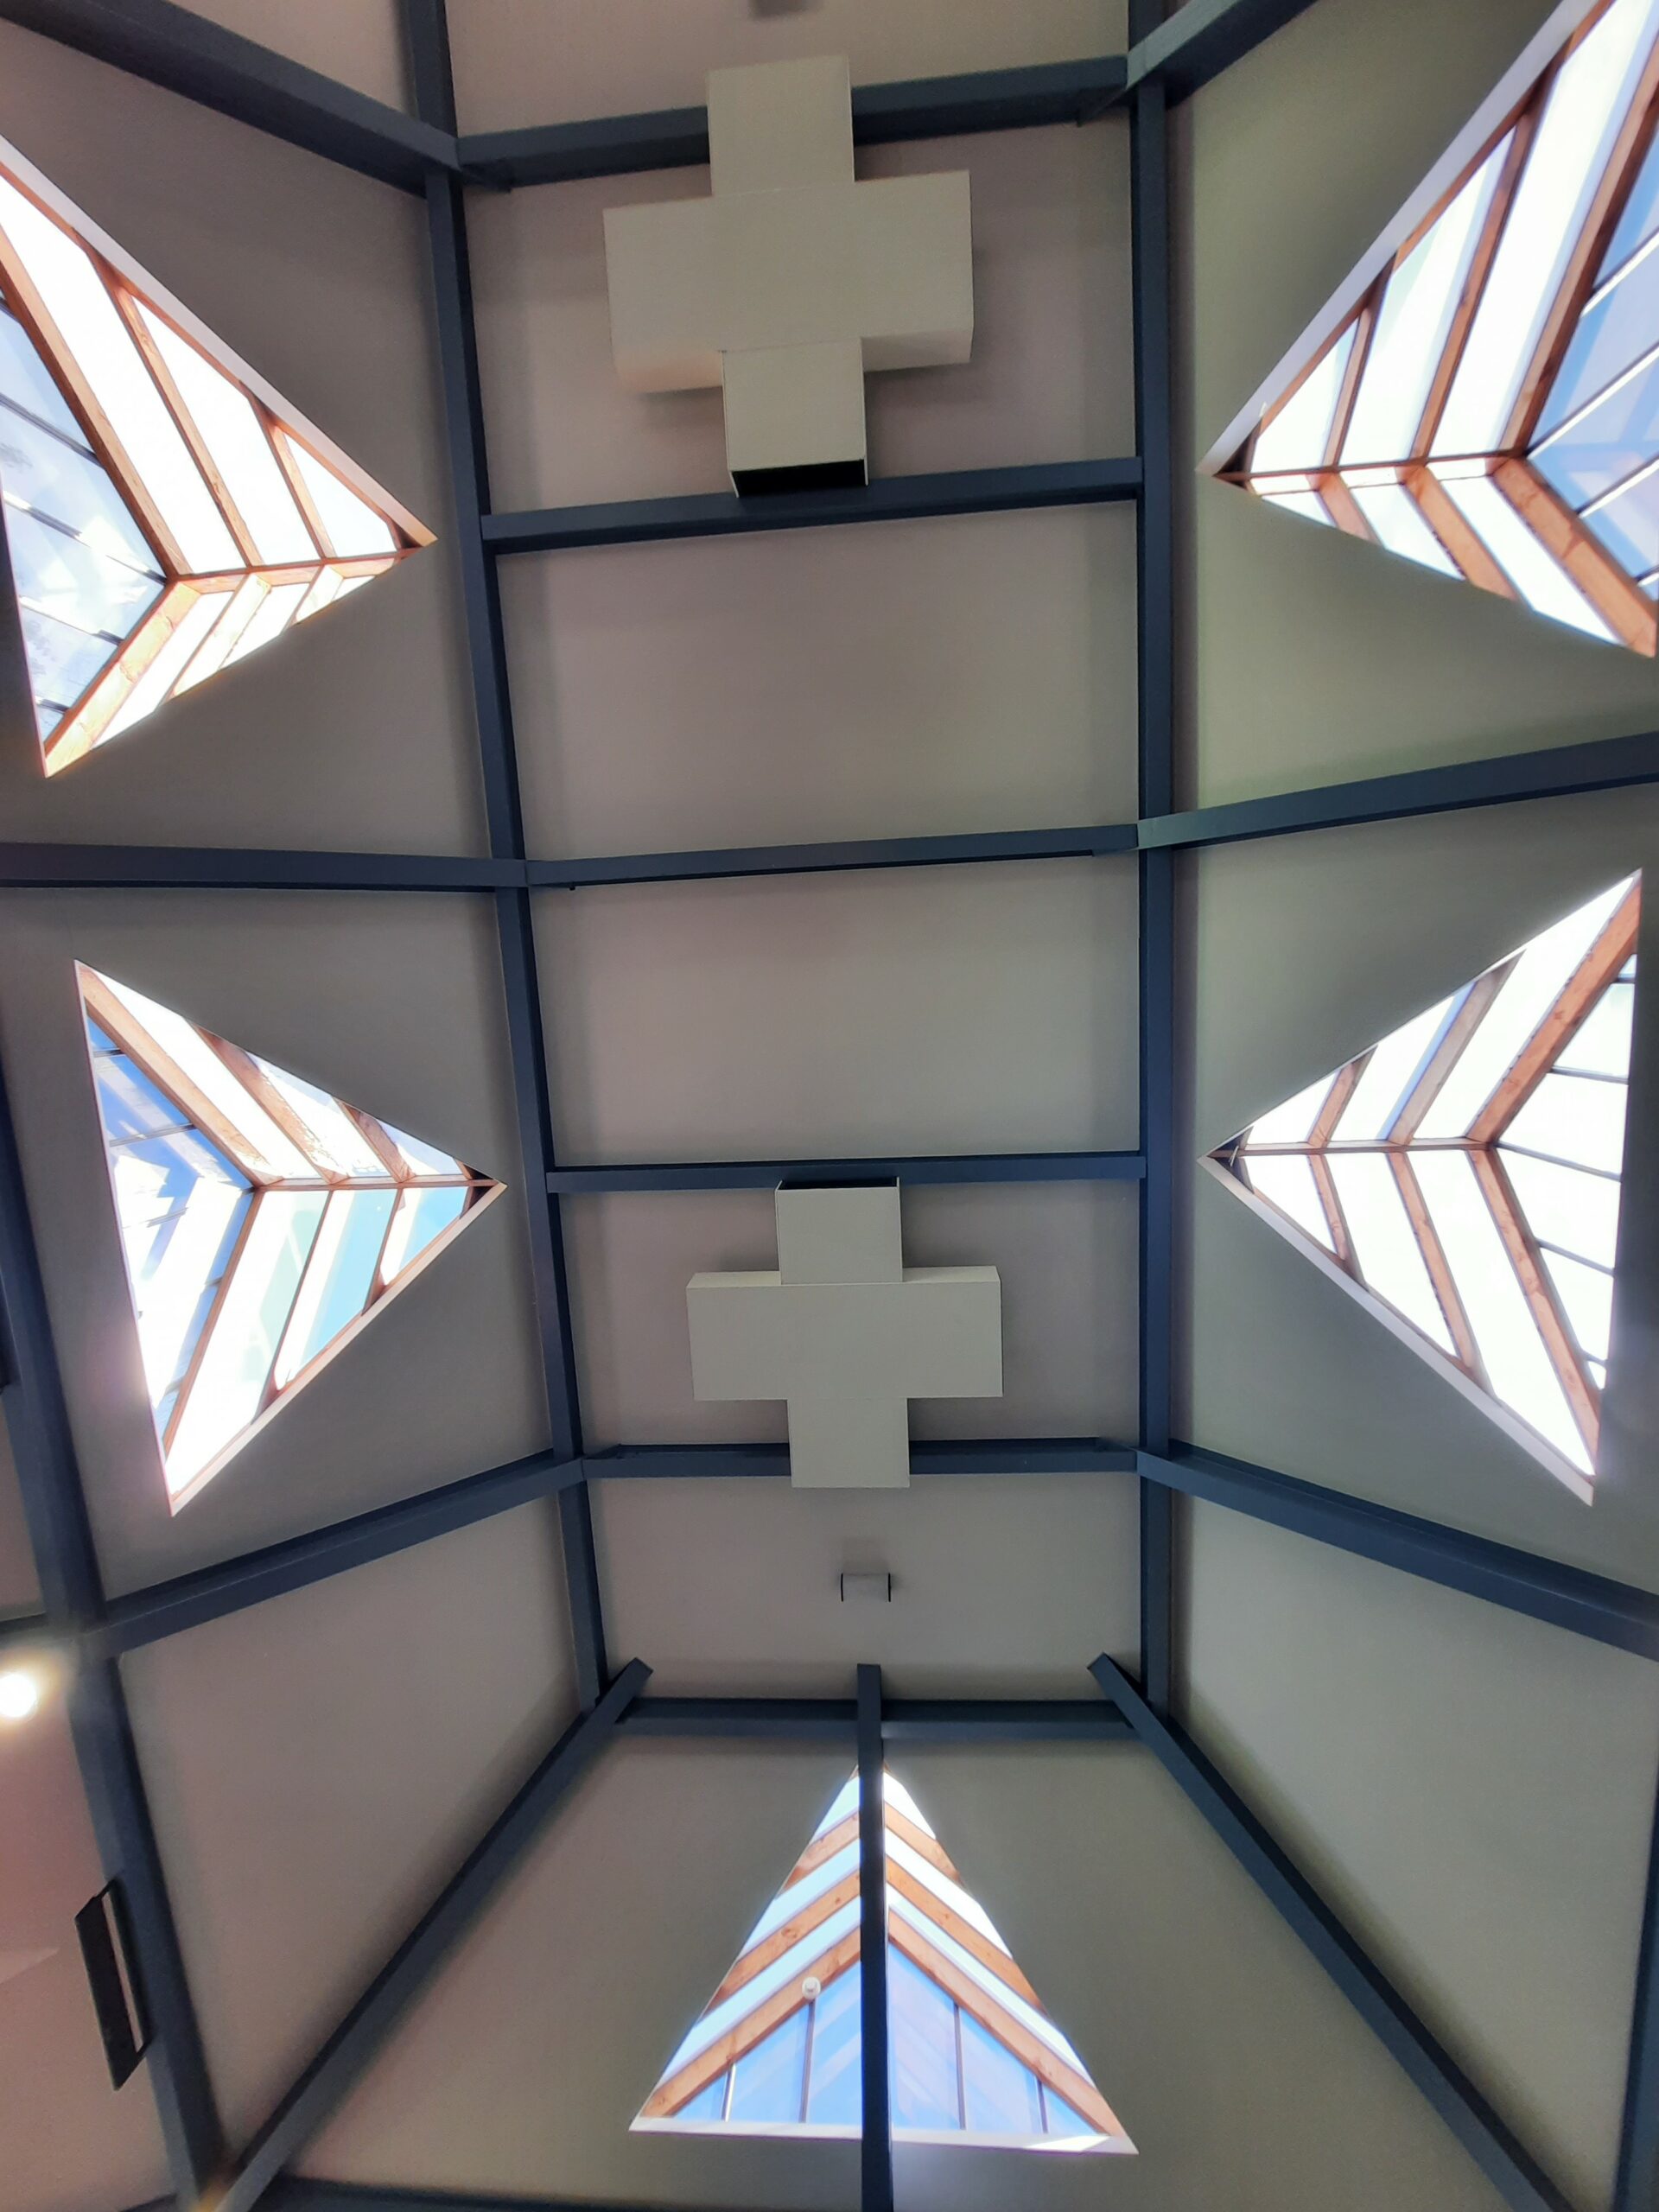 Vaulted ceiling with triangular recessed skylights pointing inwards.